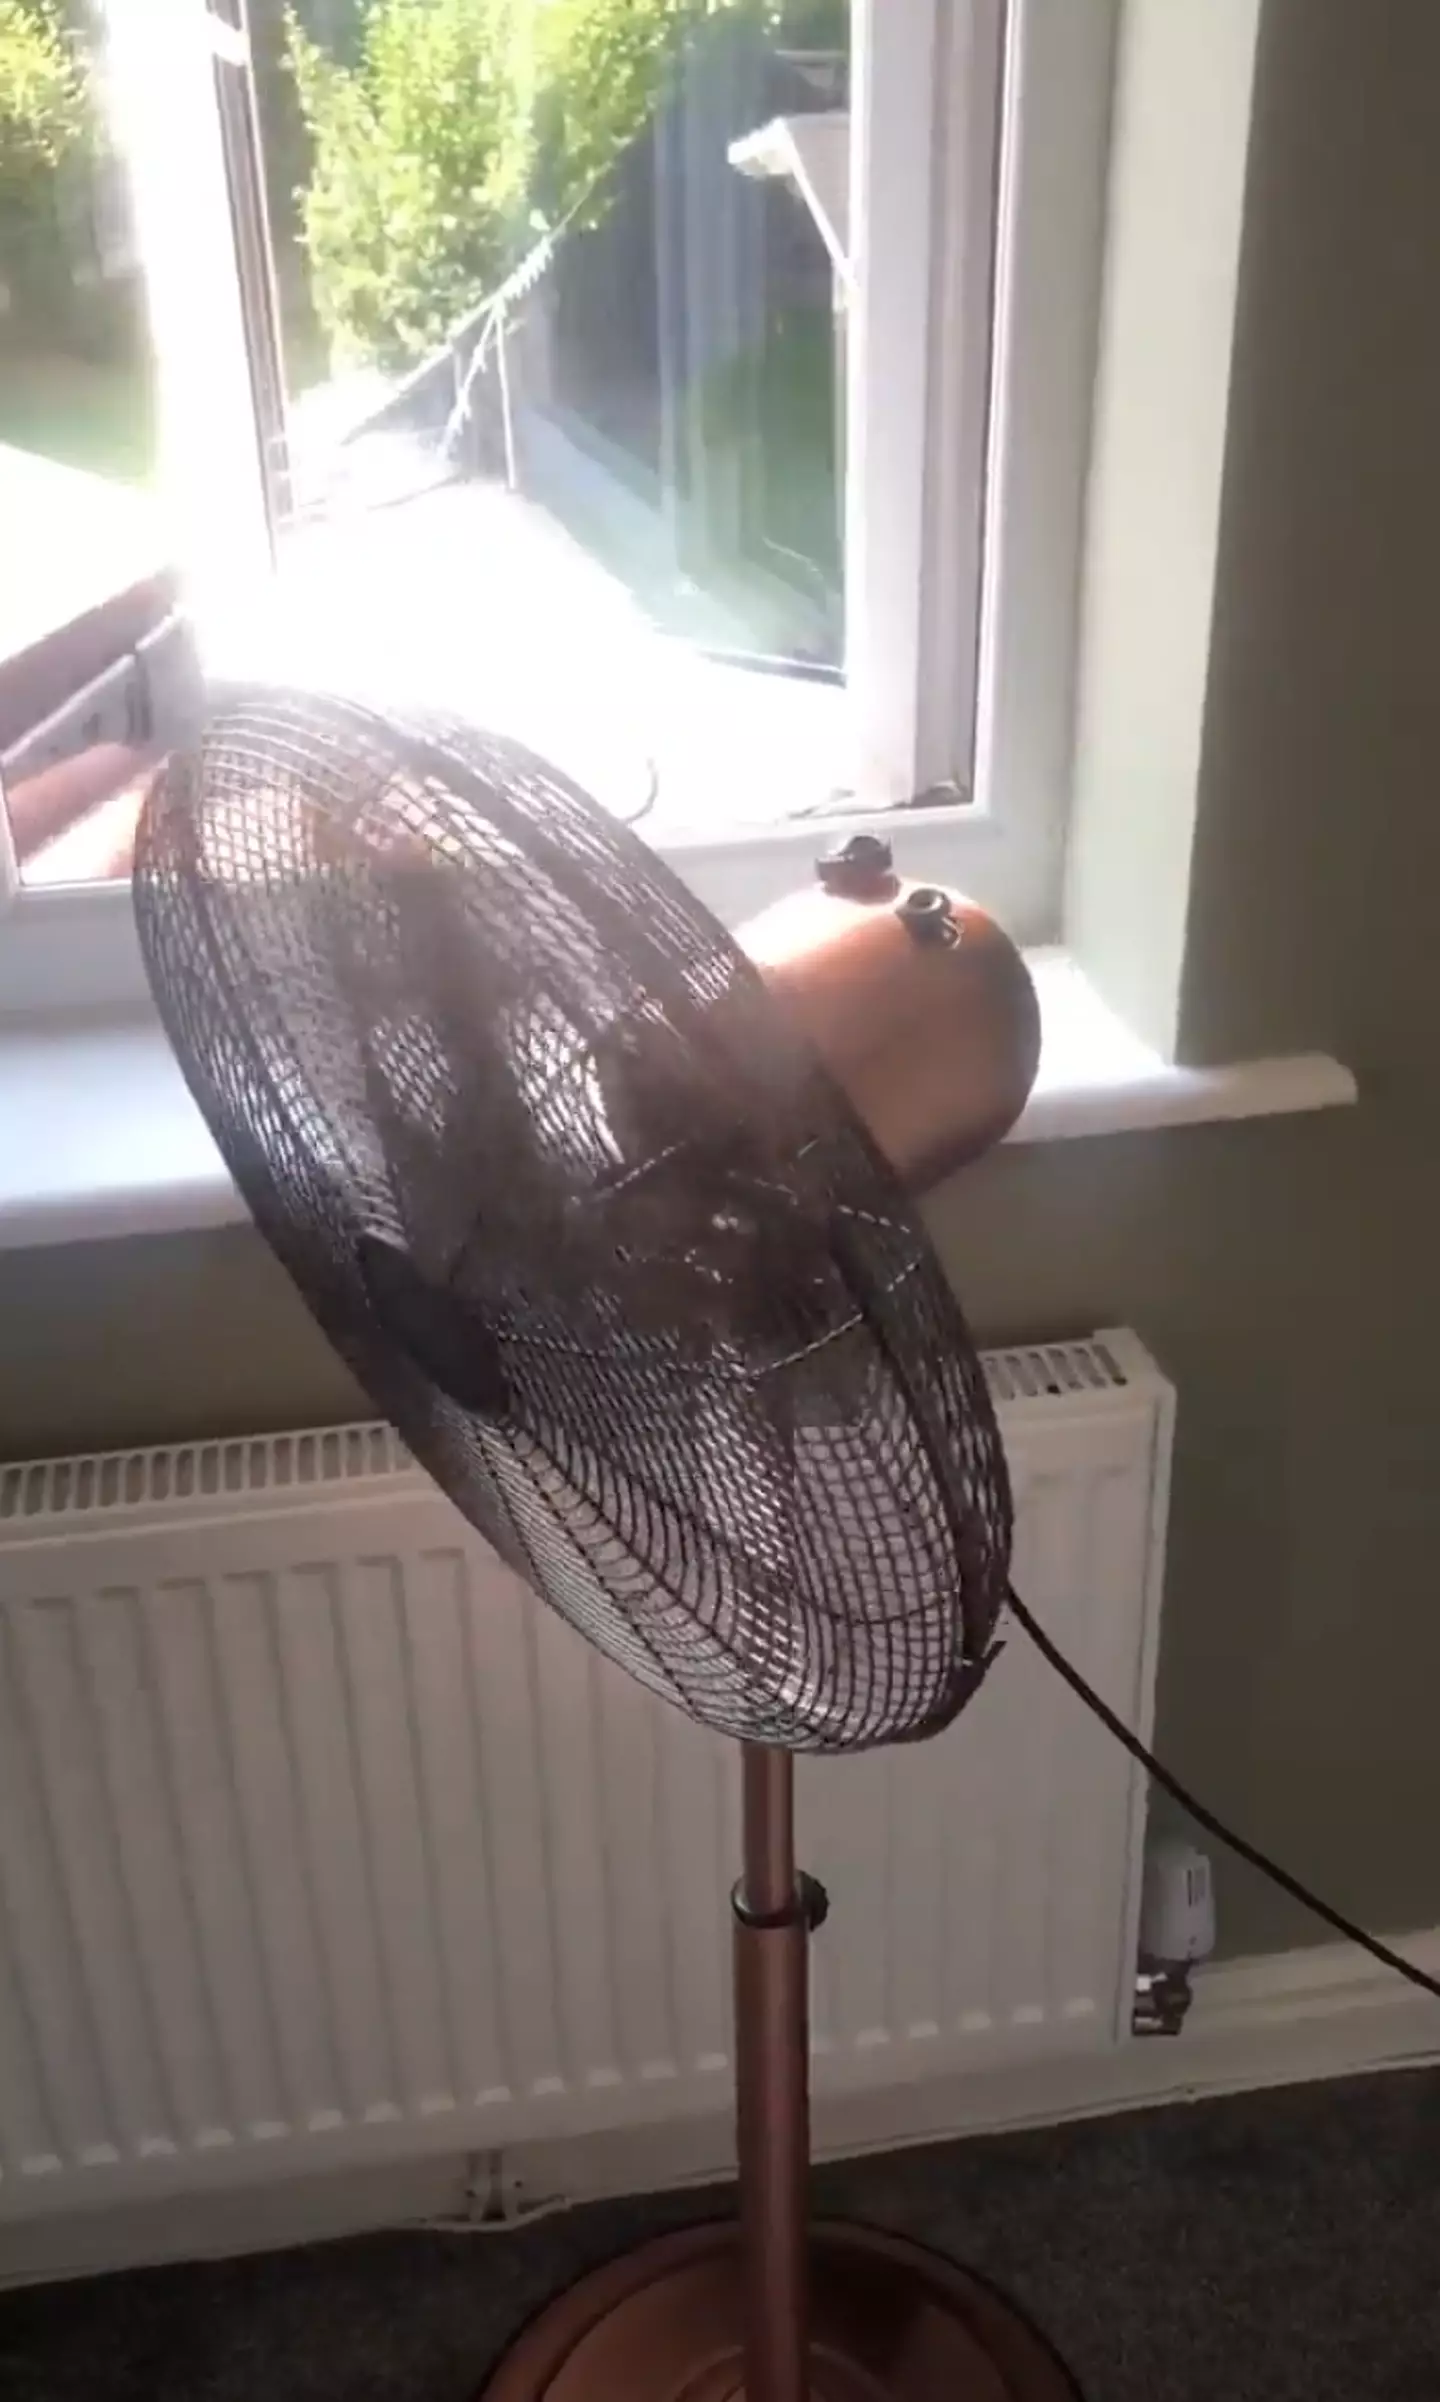 All you need is a fan and a window.